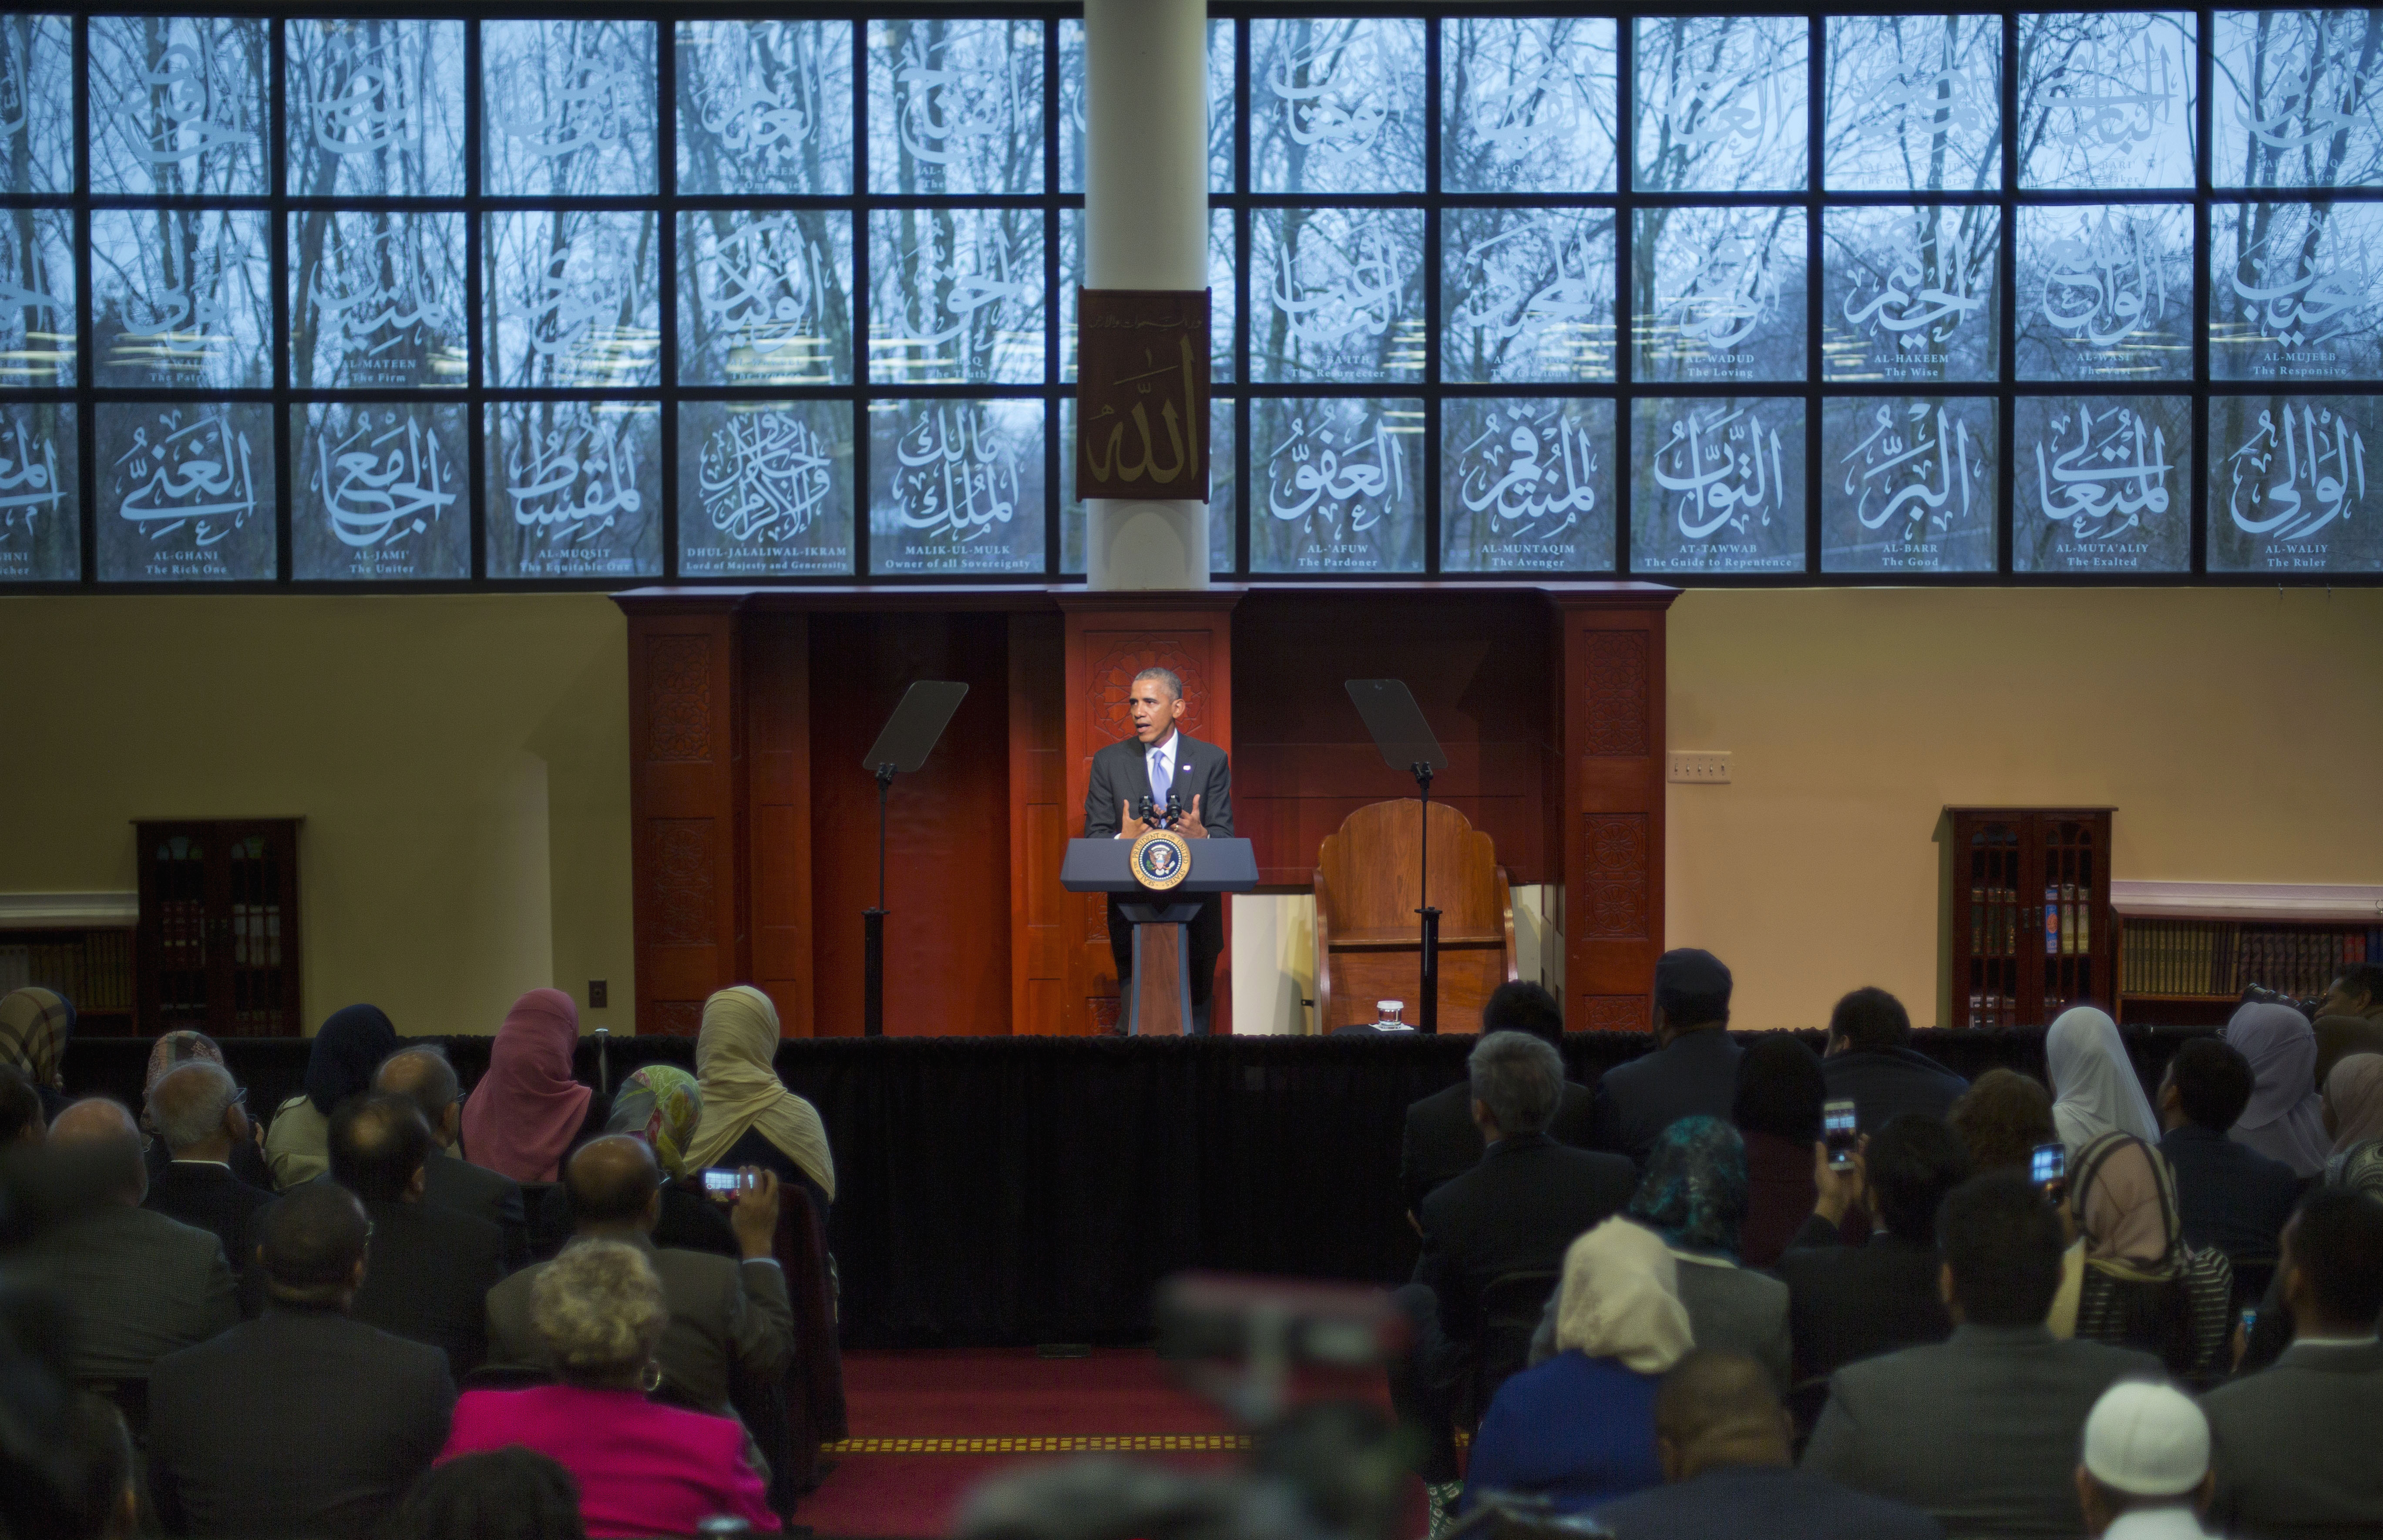 Alhurra, Radio Sawa cover President Obama’s first visit to a U.S. mosque